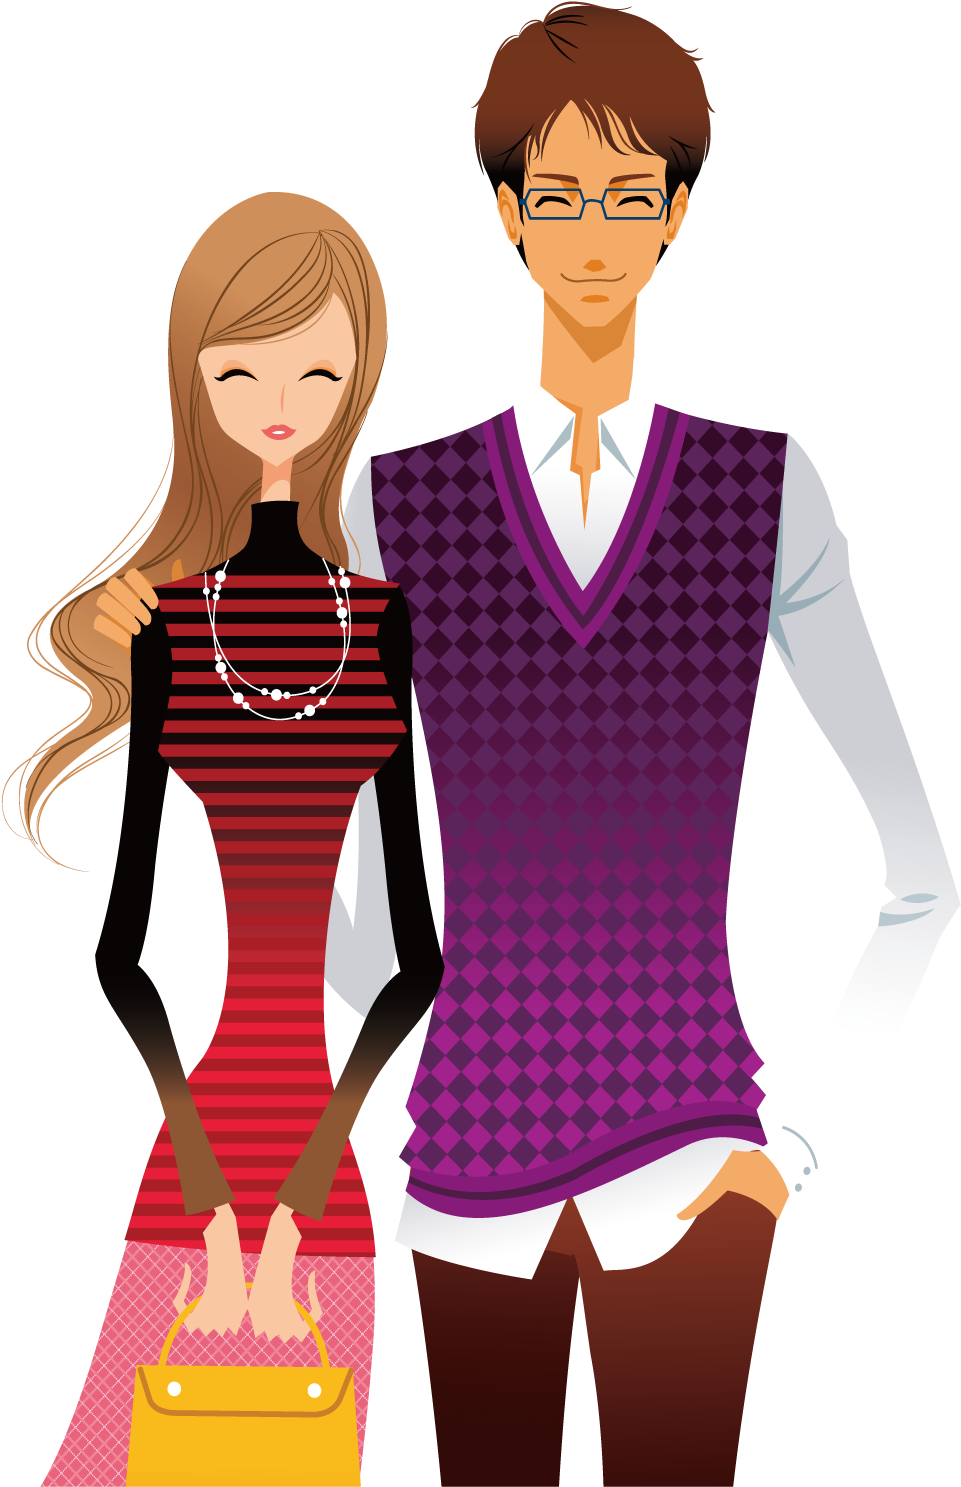 Royalty-free Photography Couple Clip Art - Royalty-free Photography Couple Clip Art (1500x1501)